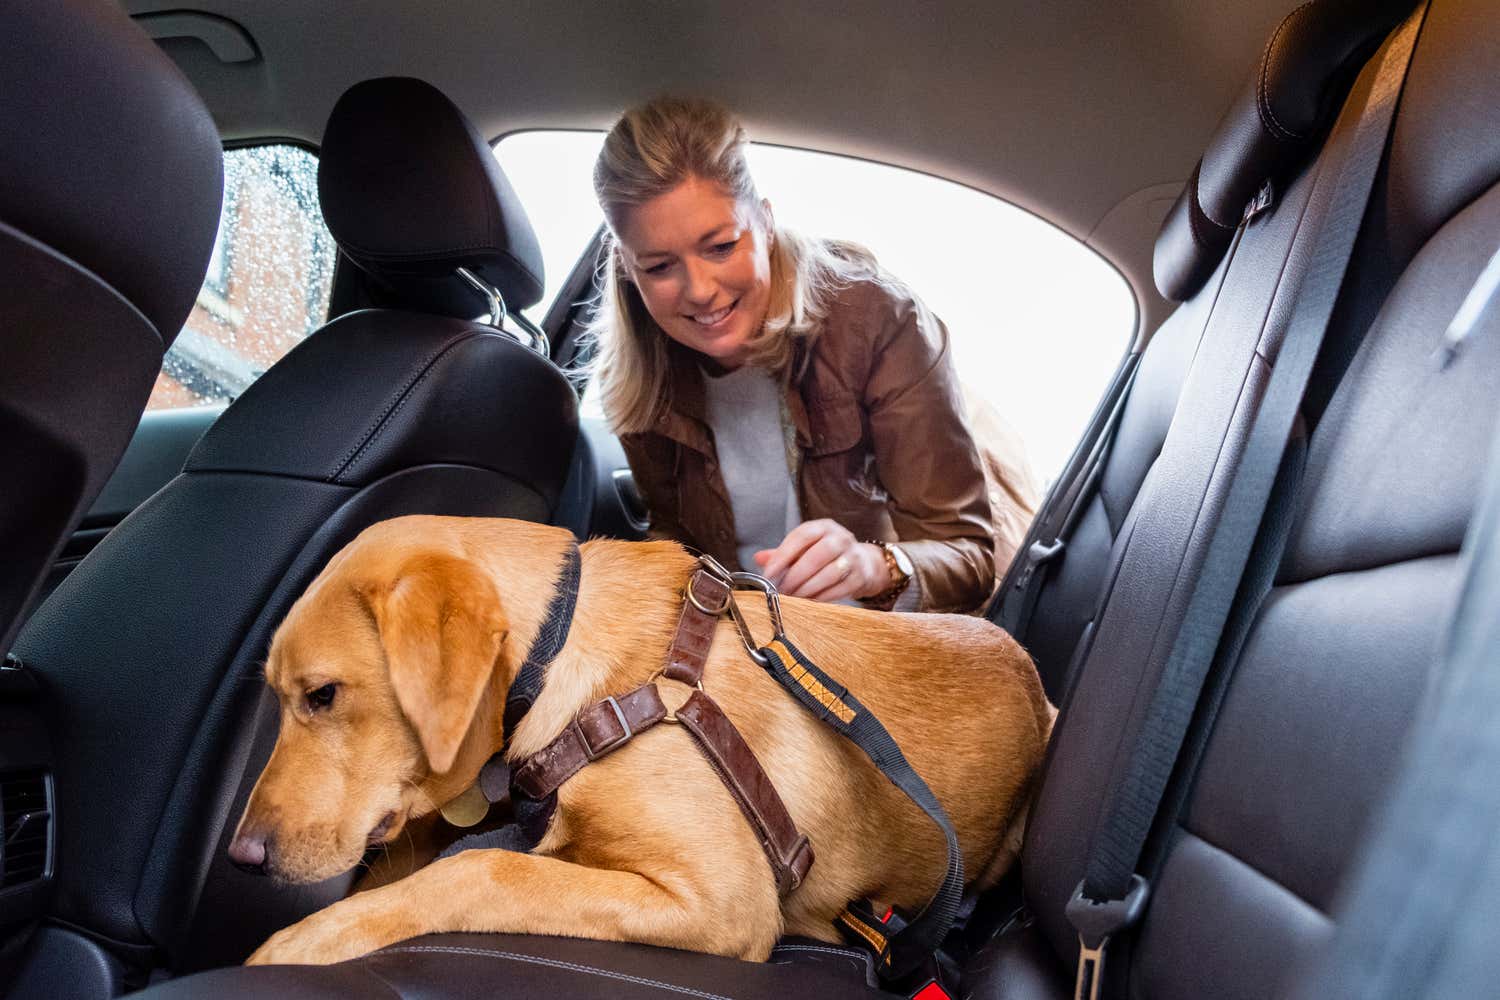 Woman safely buckling dog in backseat